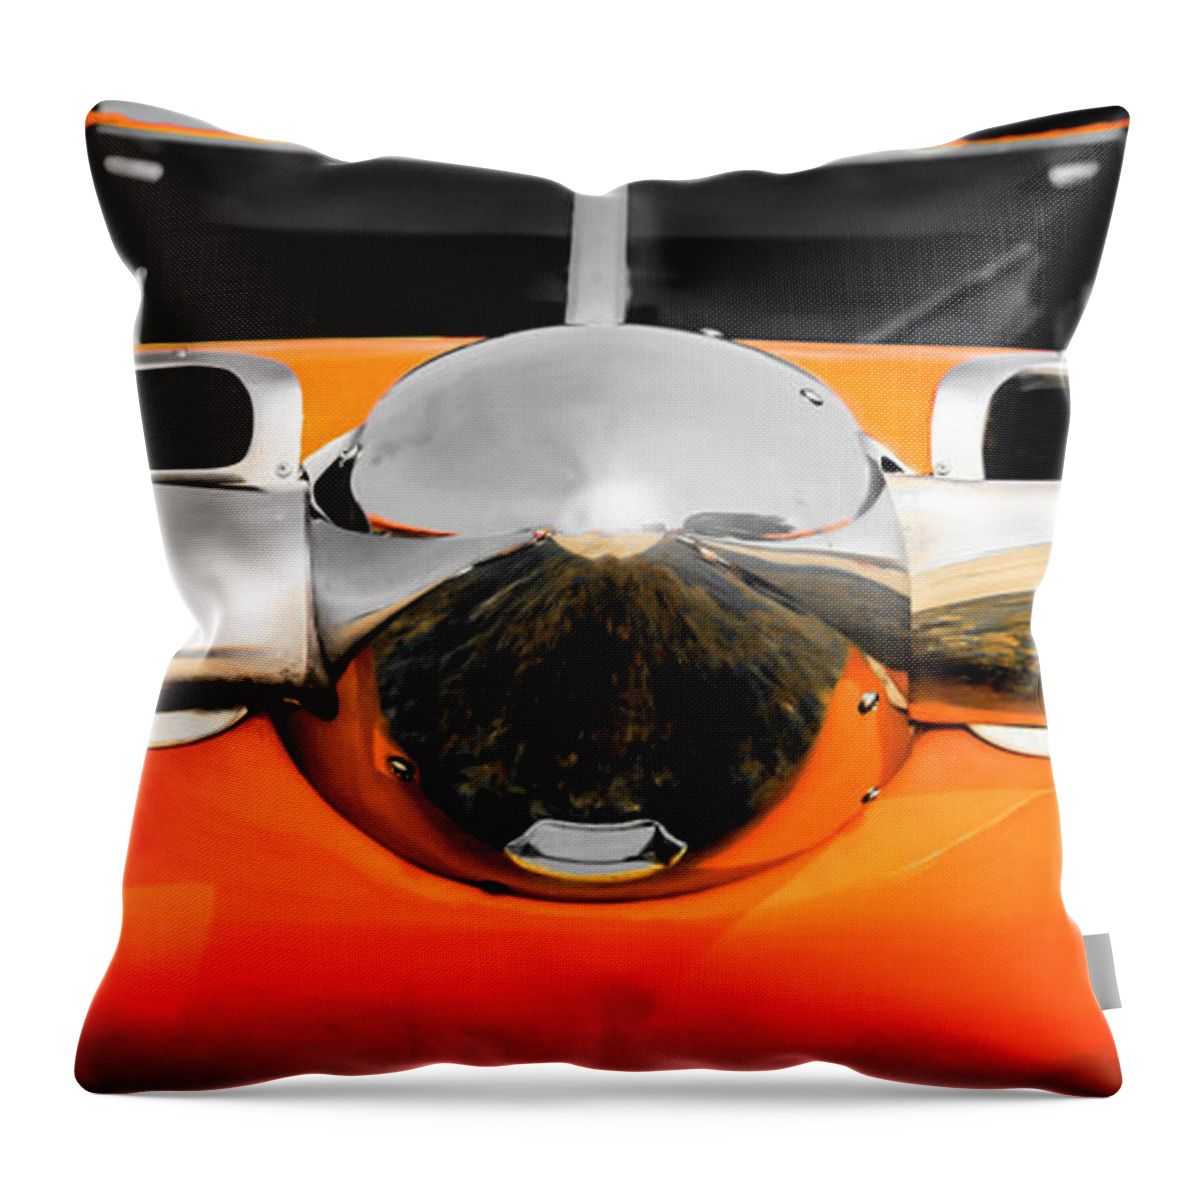 108-2 Throw Pillow featuring the photograph Pretty in Orange by Chris Smith